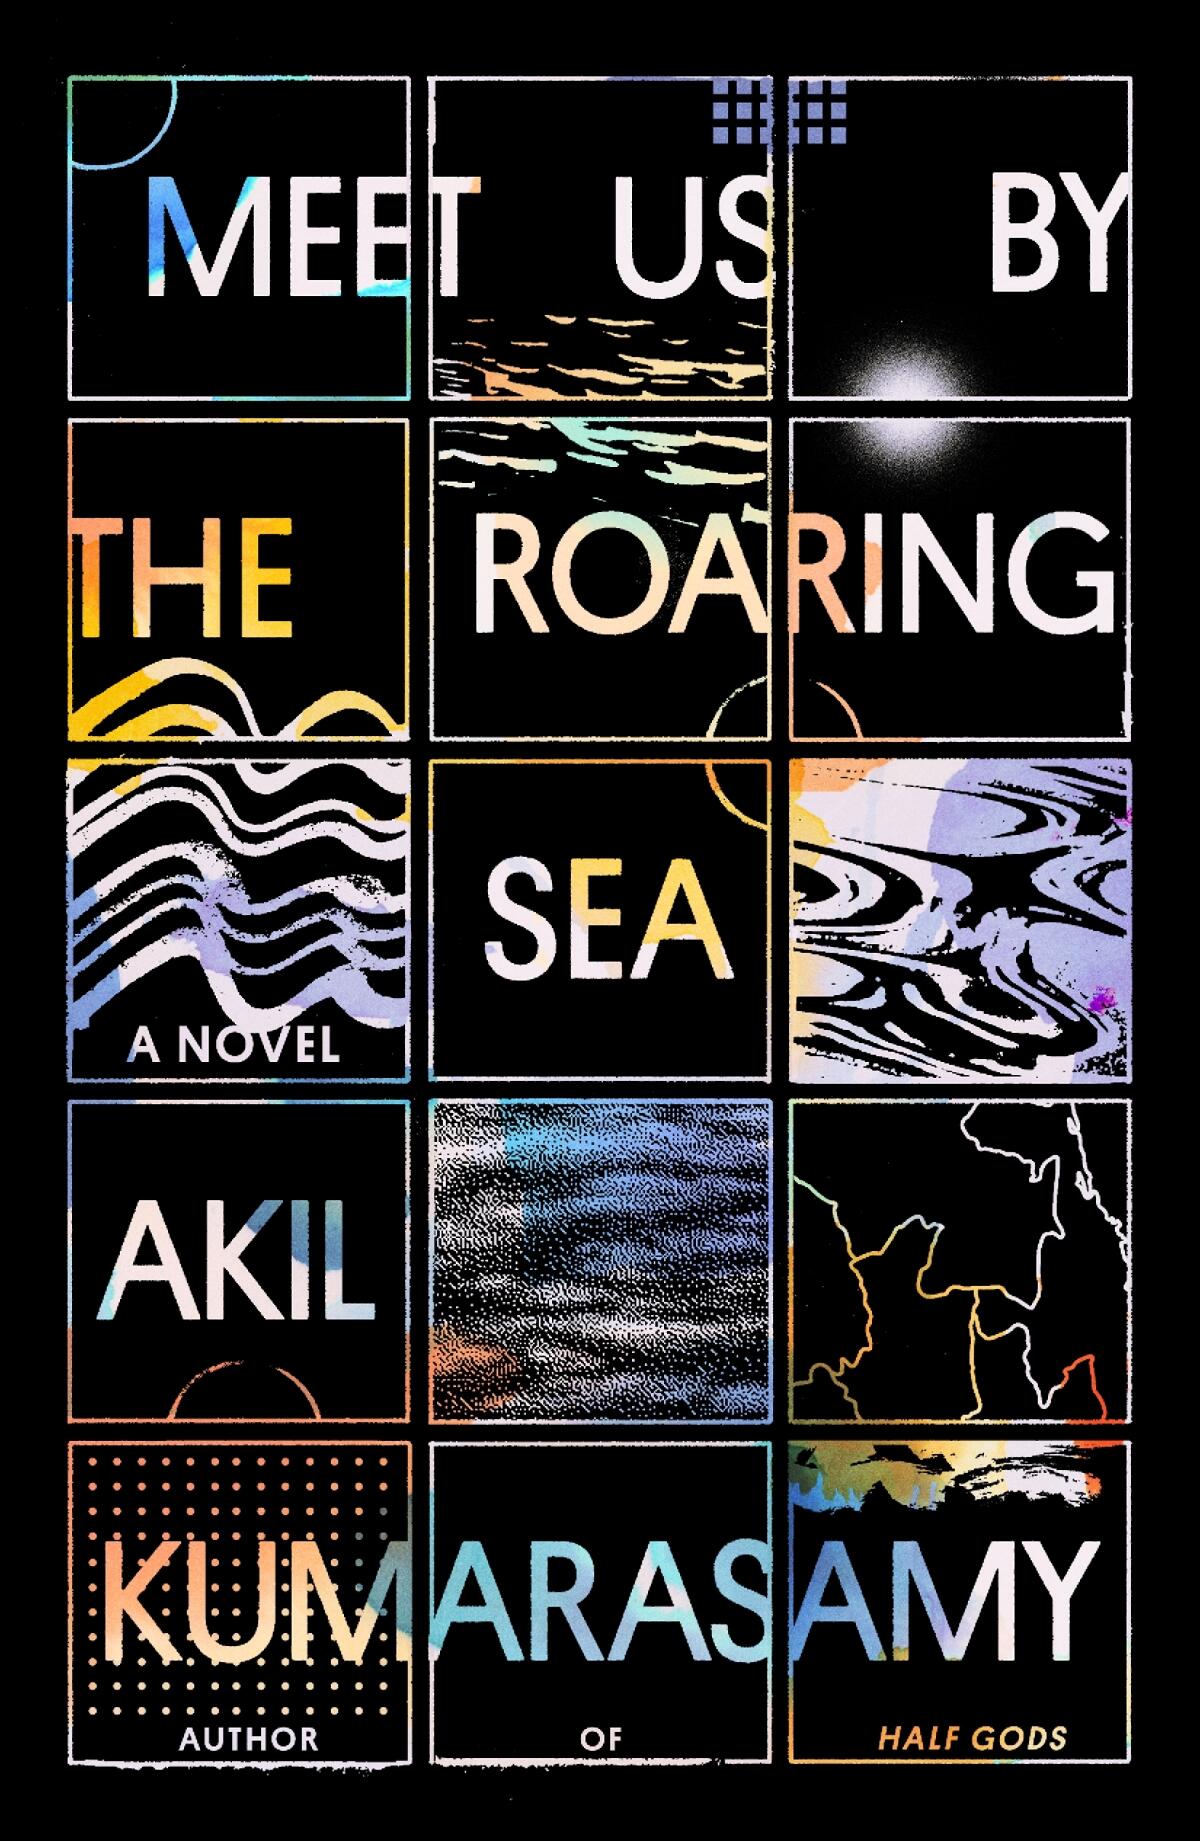 The cover of "Meet Us by the Roaring Sea: A Novel" by Akil Kumarasamy.